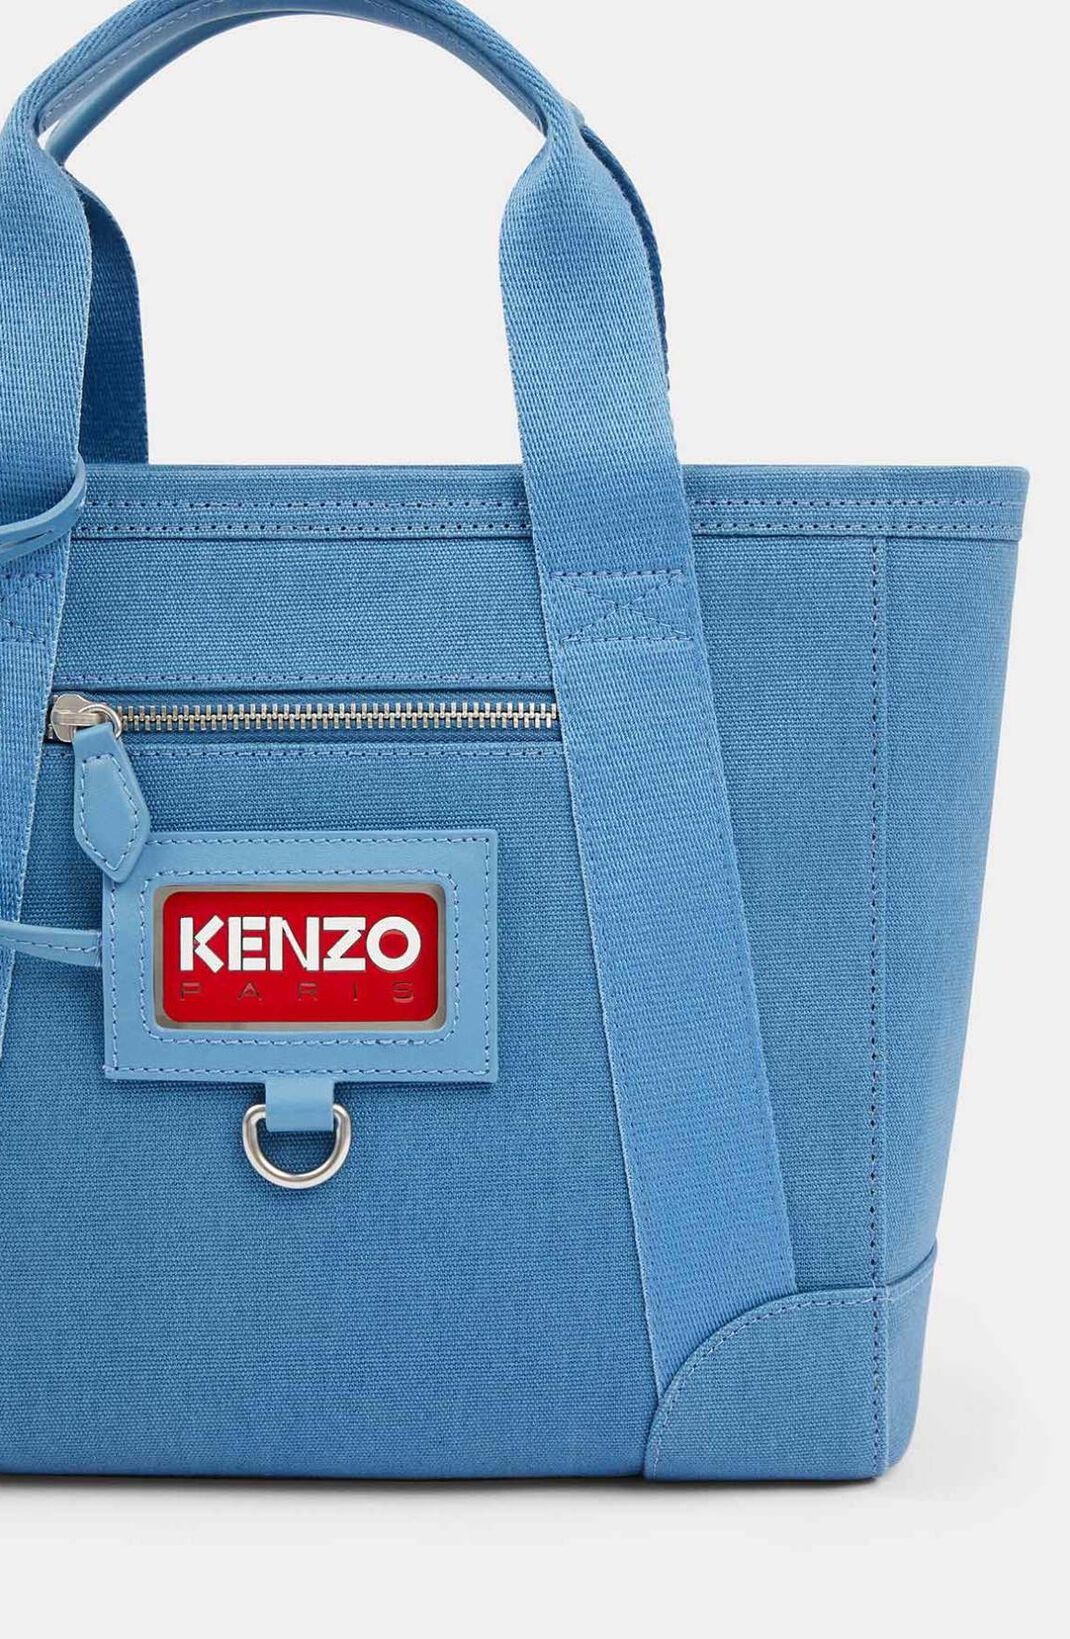 KENZO Paris small tote bag with crossbody strap - 4